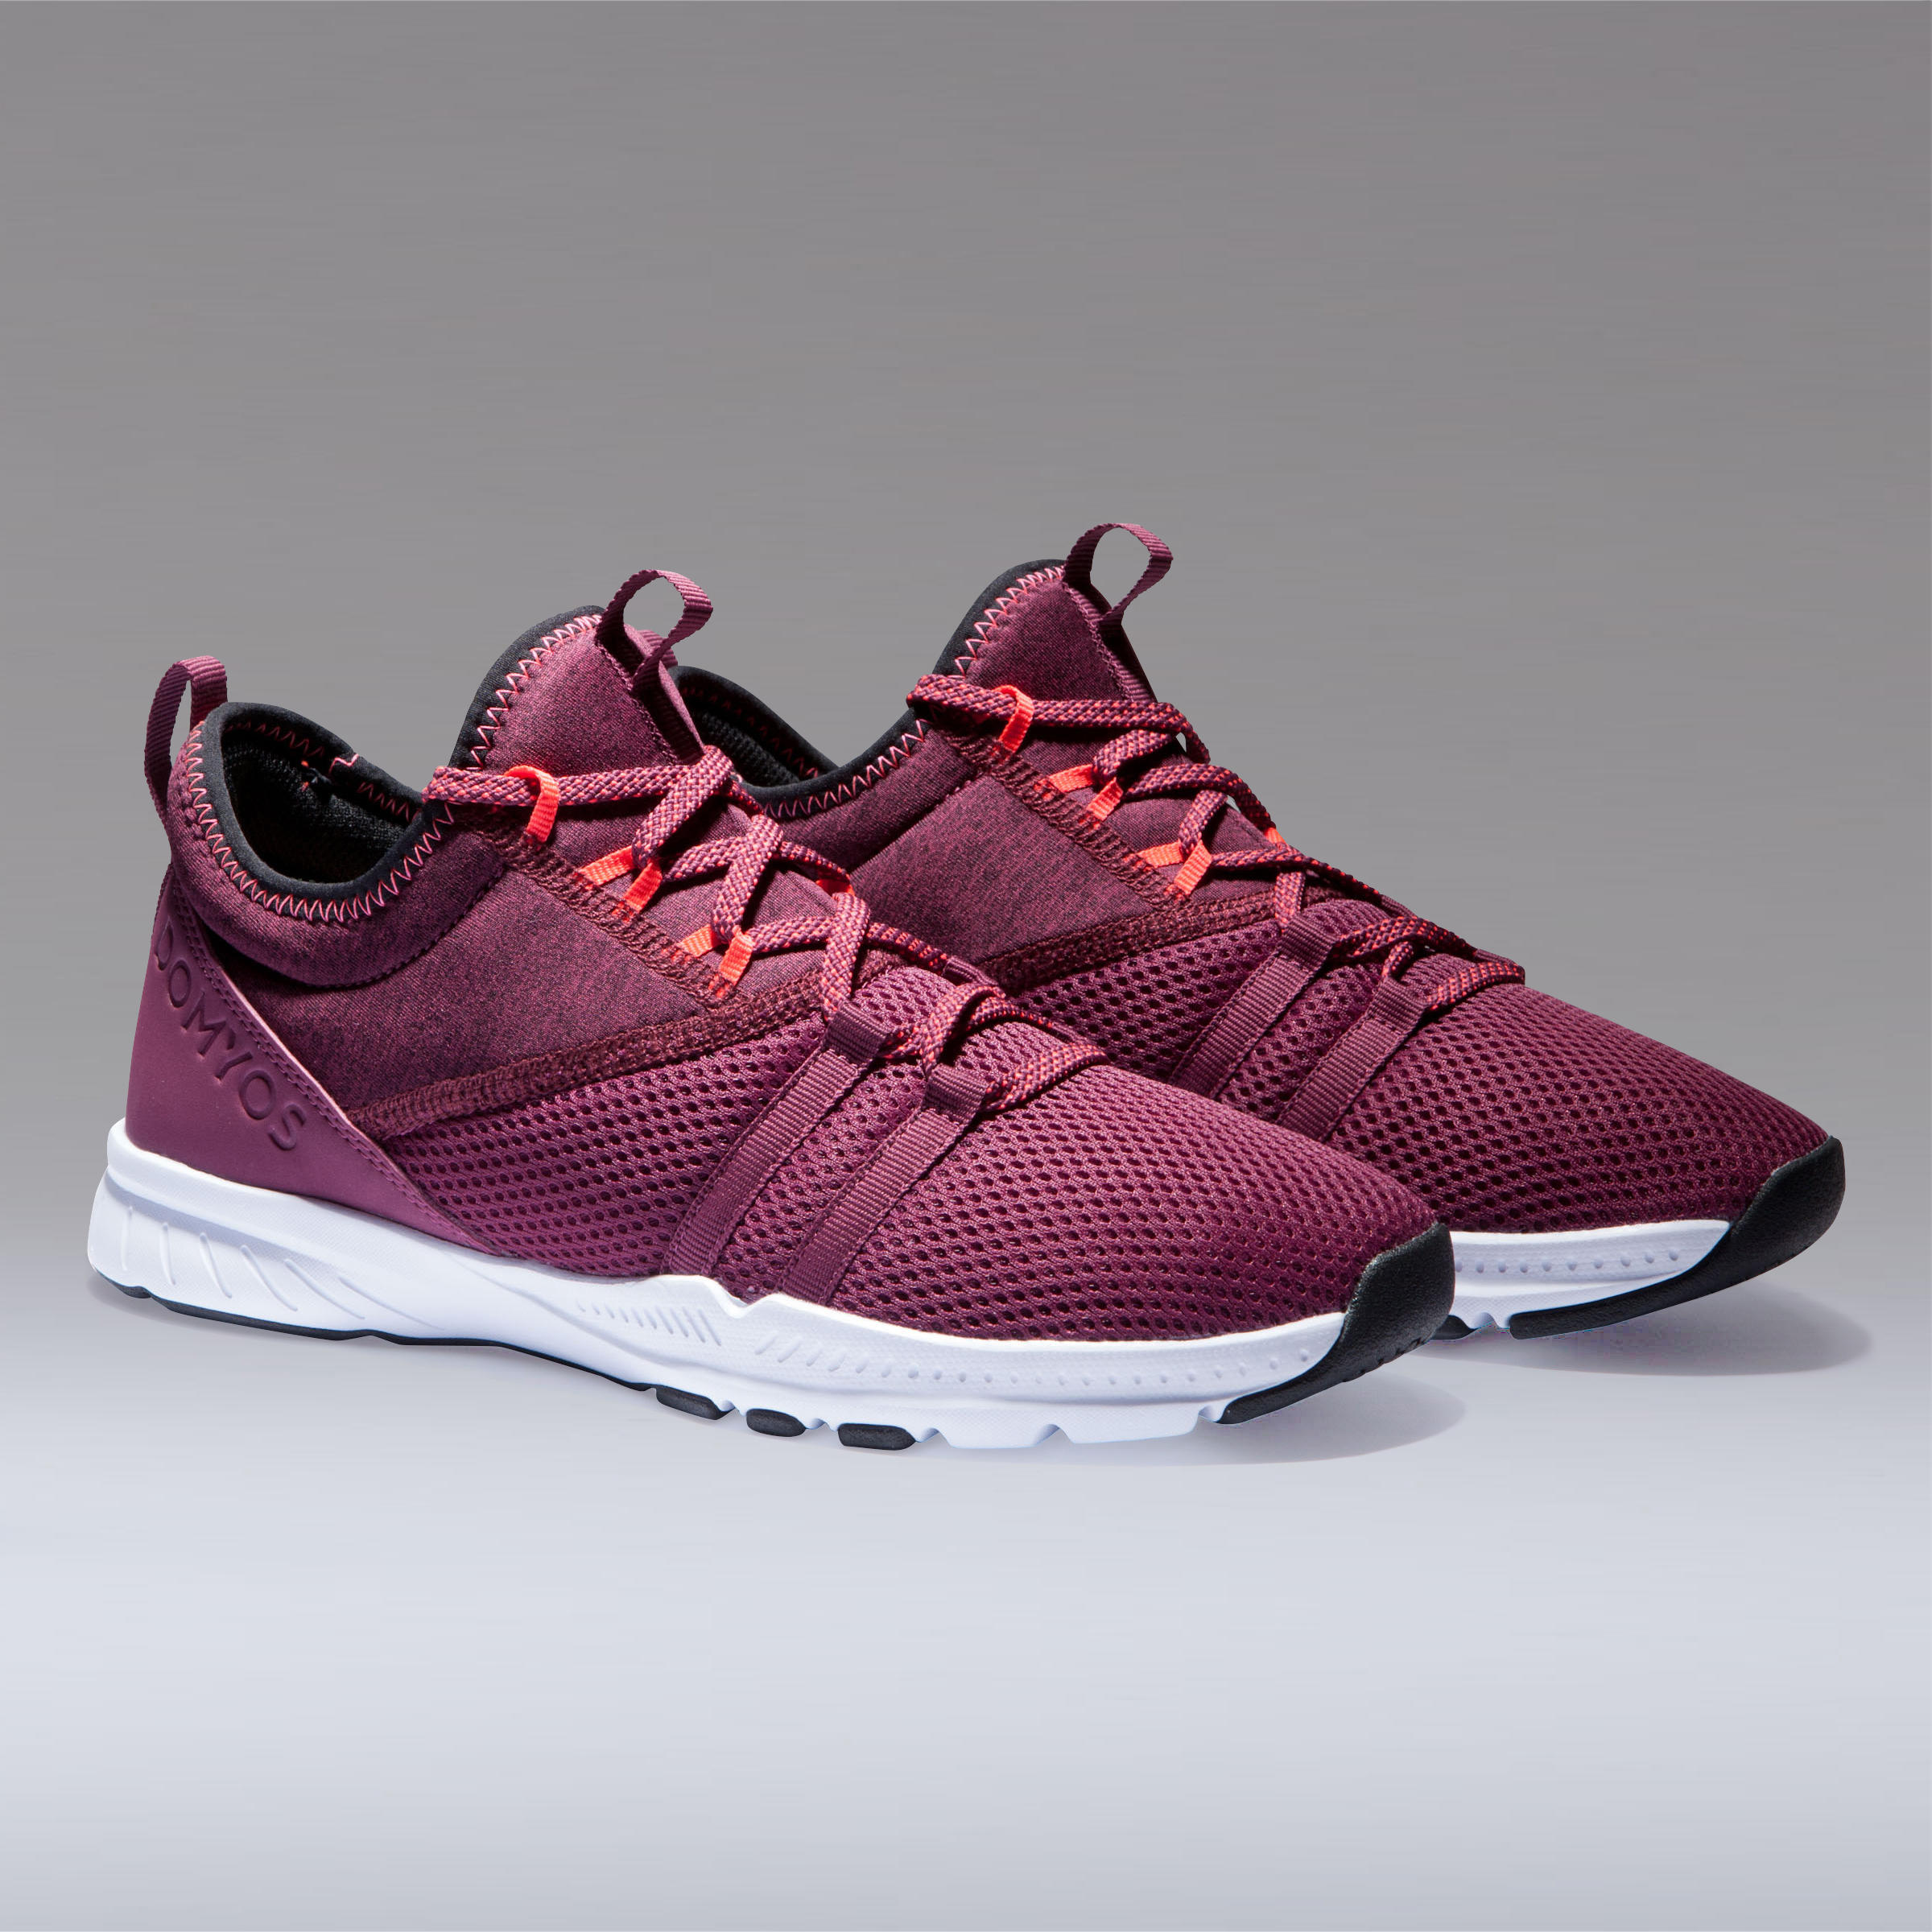 Women's Fitness Shoes 120 Mid - Burgundy 5/16